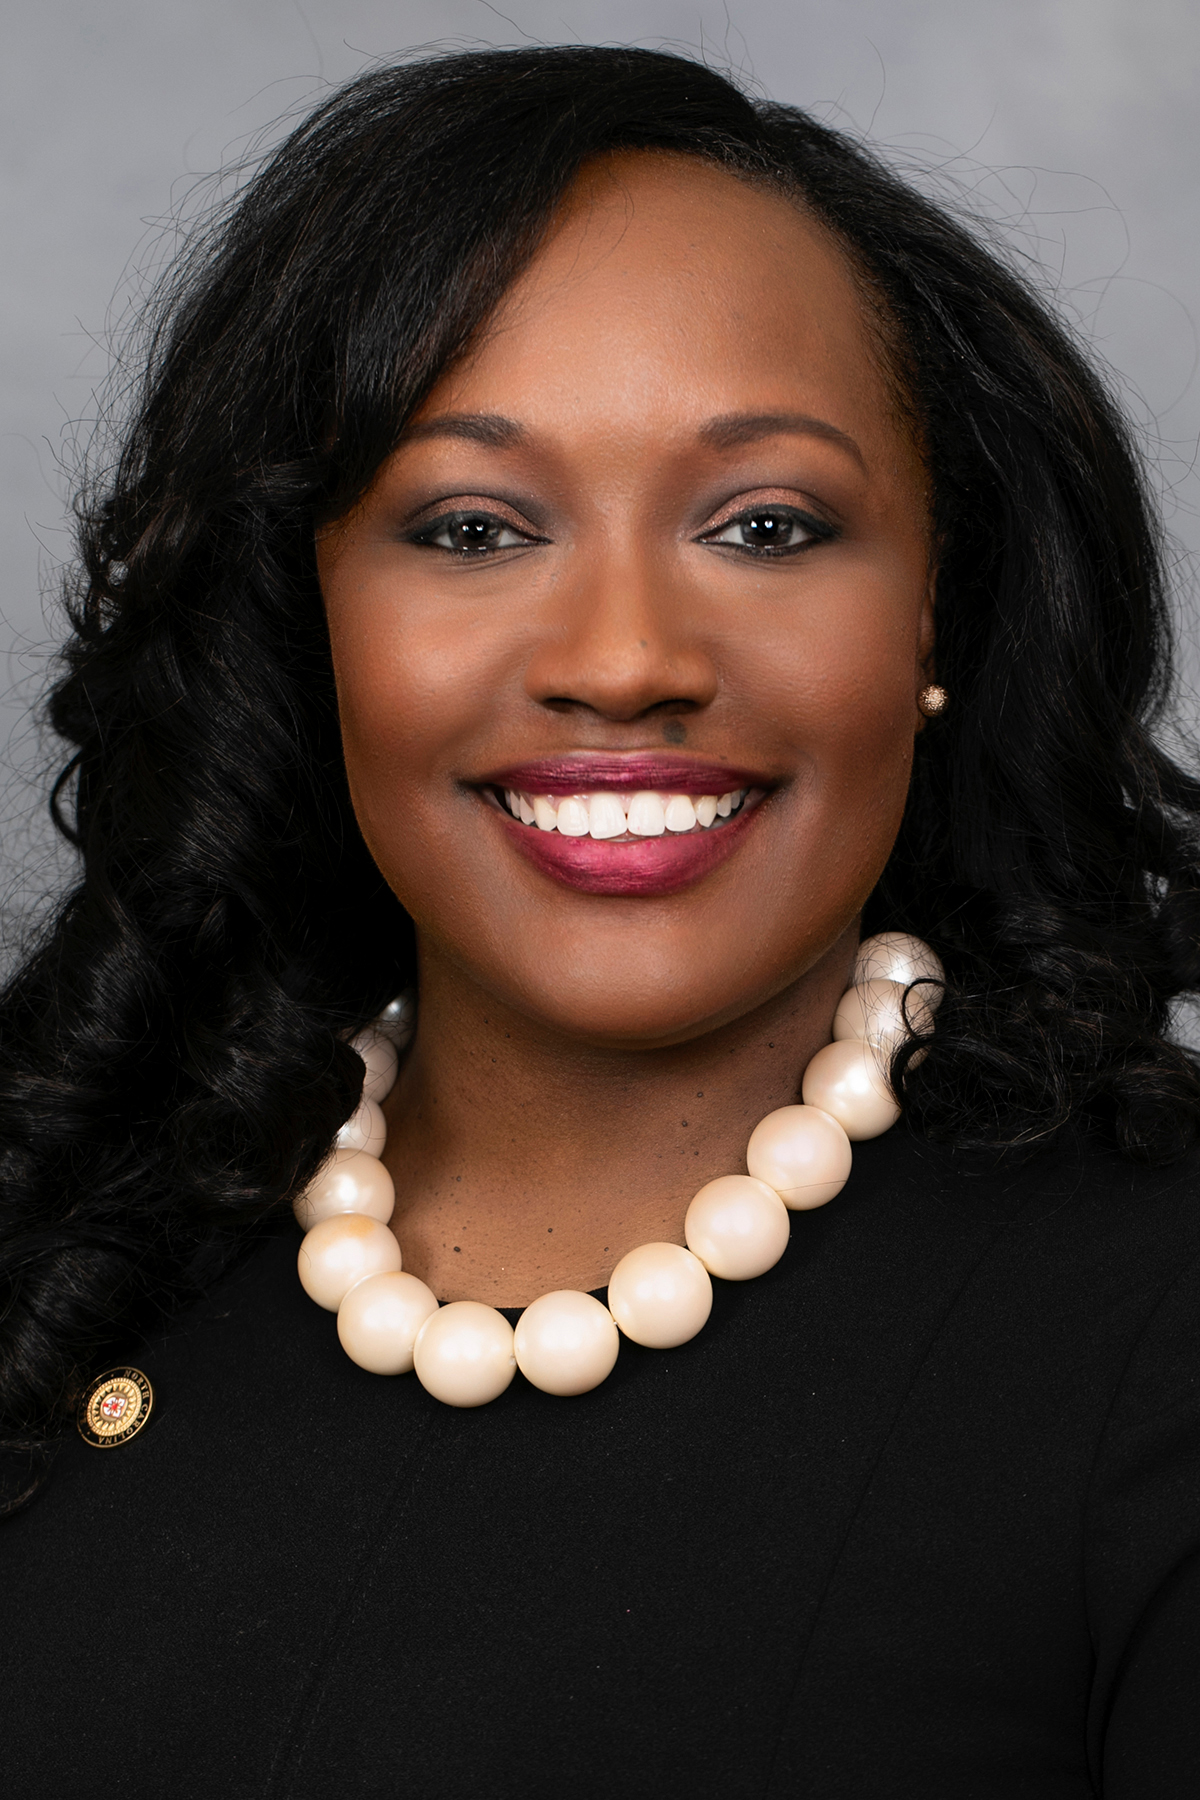 Senator Natalie S Murdock wearing a black blouse with white pearls